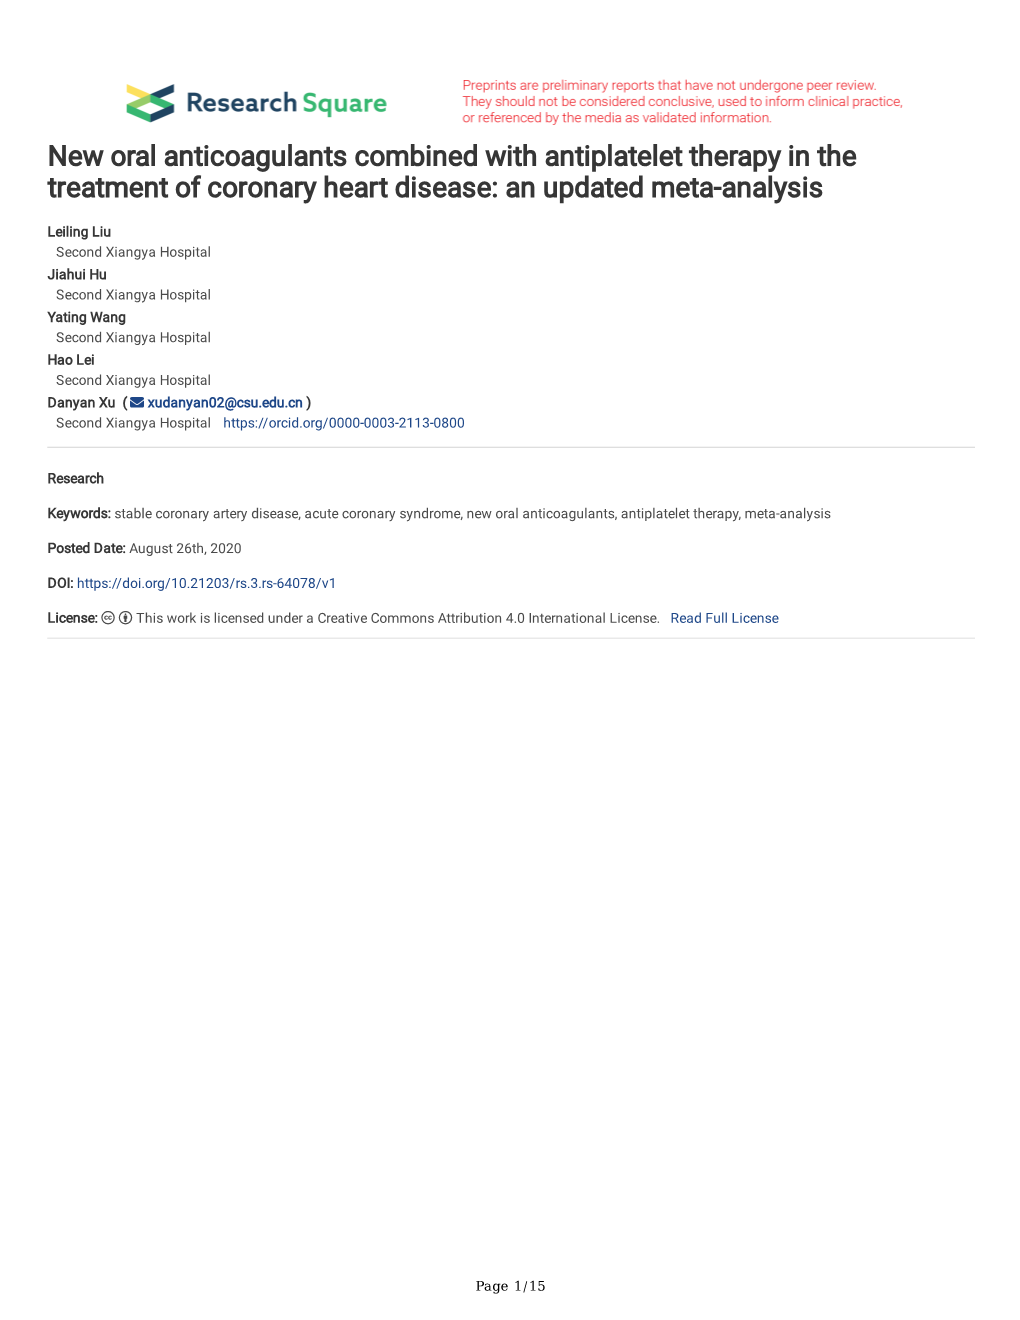 New Oral Anticoagulants Combined with Antiplatelet Therapy in the Treatment of Coronary Heart Disease: an Updated Meta-Analysis